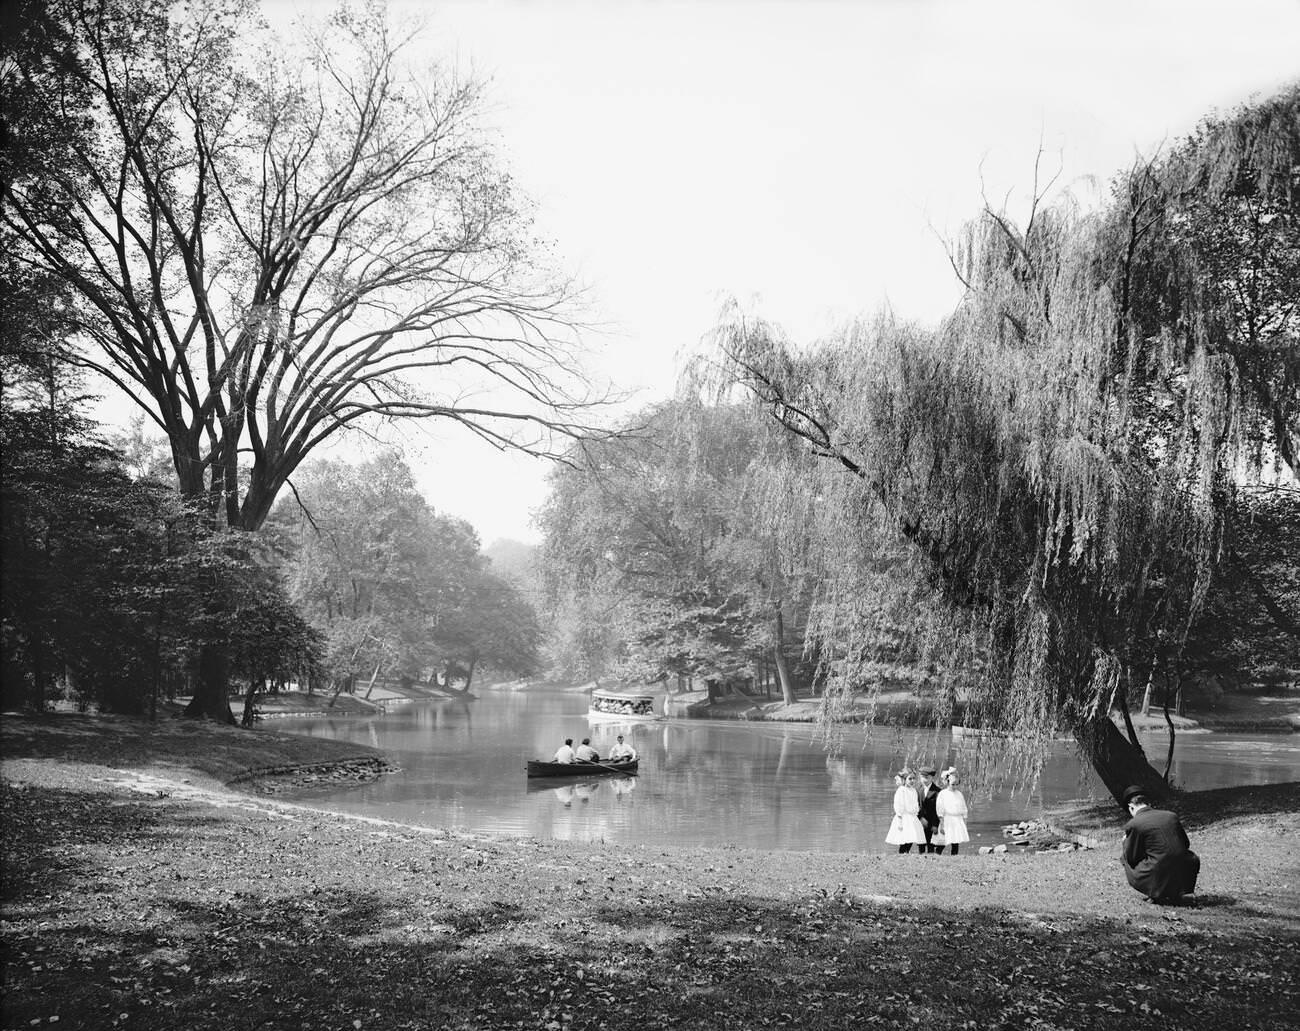 Boaters Enjoying A Day On Lake In Prospect Park, Brooklyn, 1910.